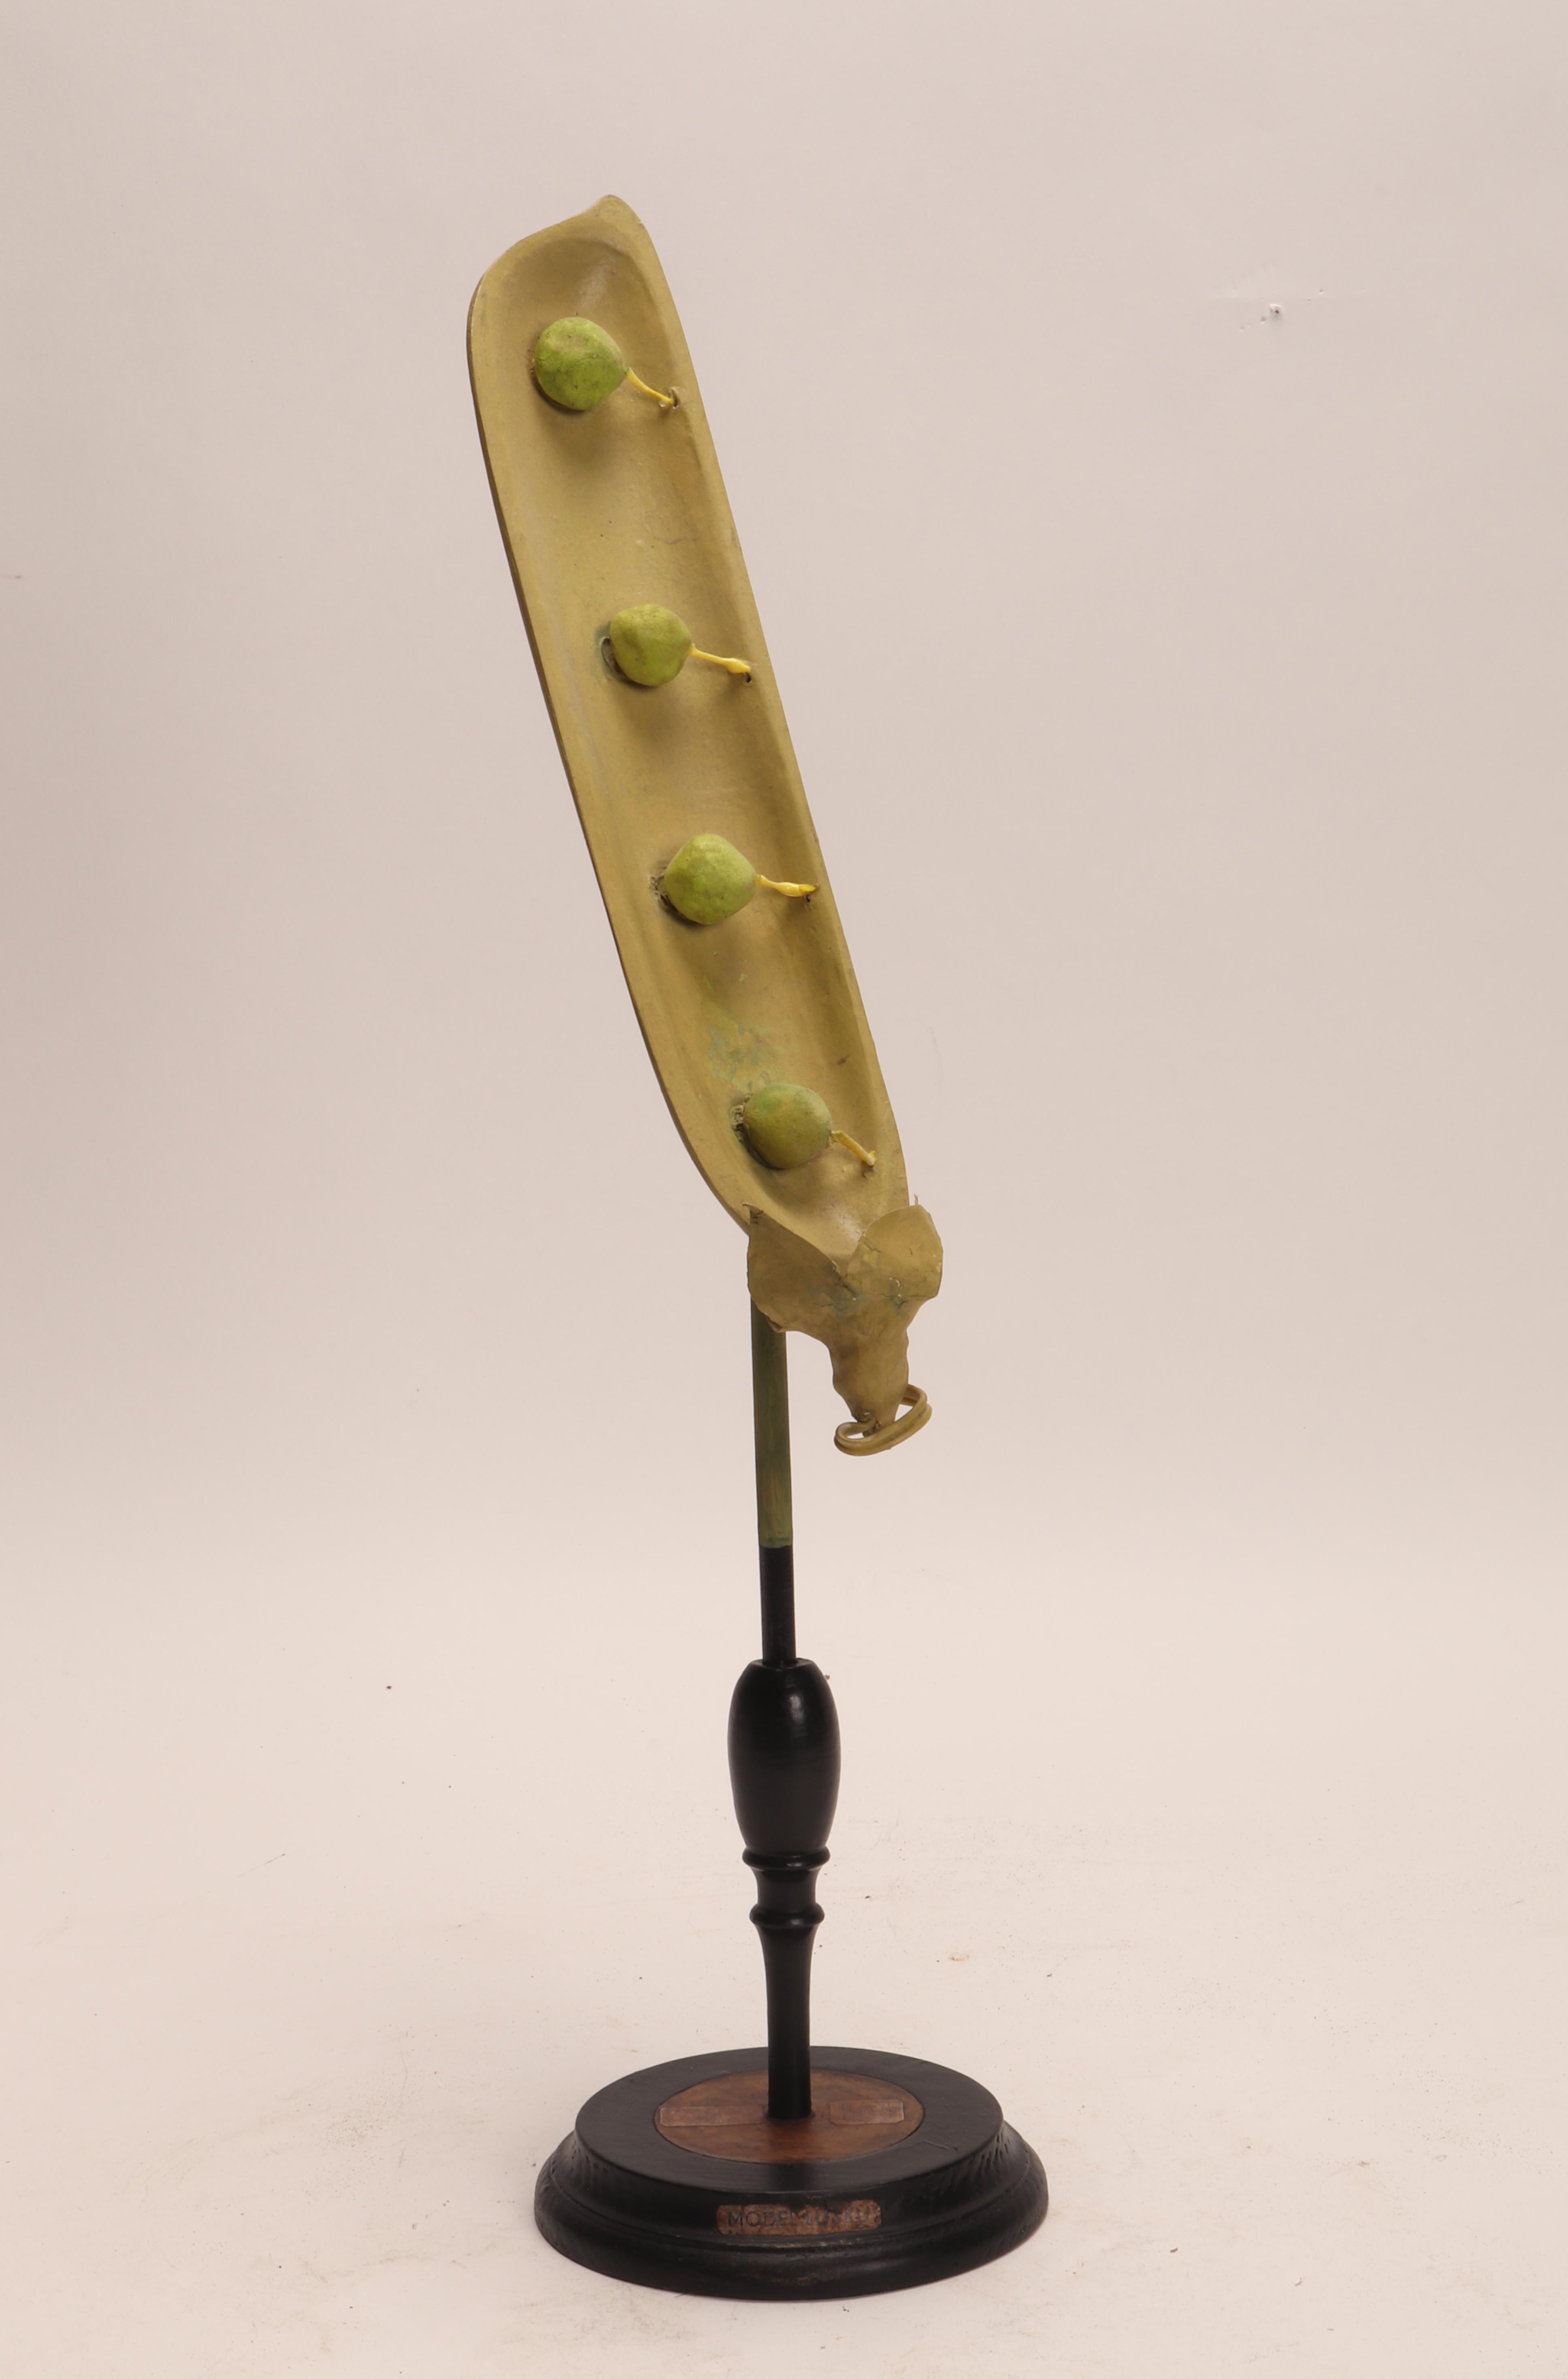 A botanic didactical specimen depicting a Pea pod (Pisum sativum), made out of papier mache wood and metal with black wooden base, hand painted. Extremely detailed. Osterloh Modell n.11. Germany circa 1900. These botanical models were used in